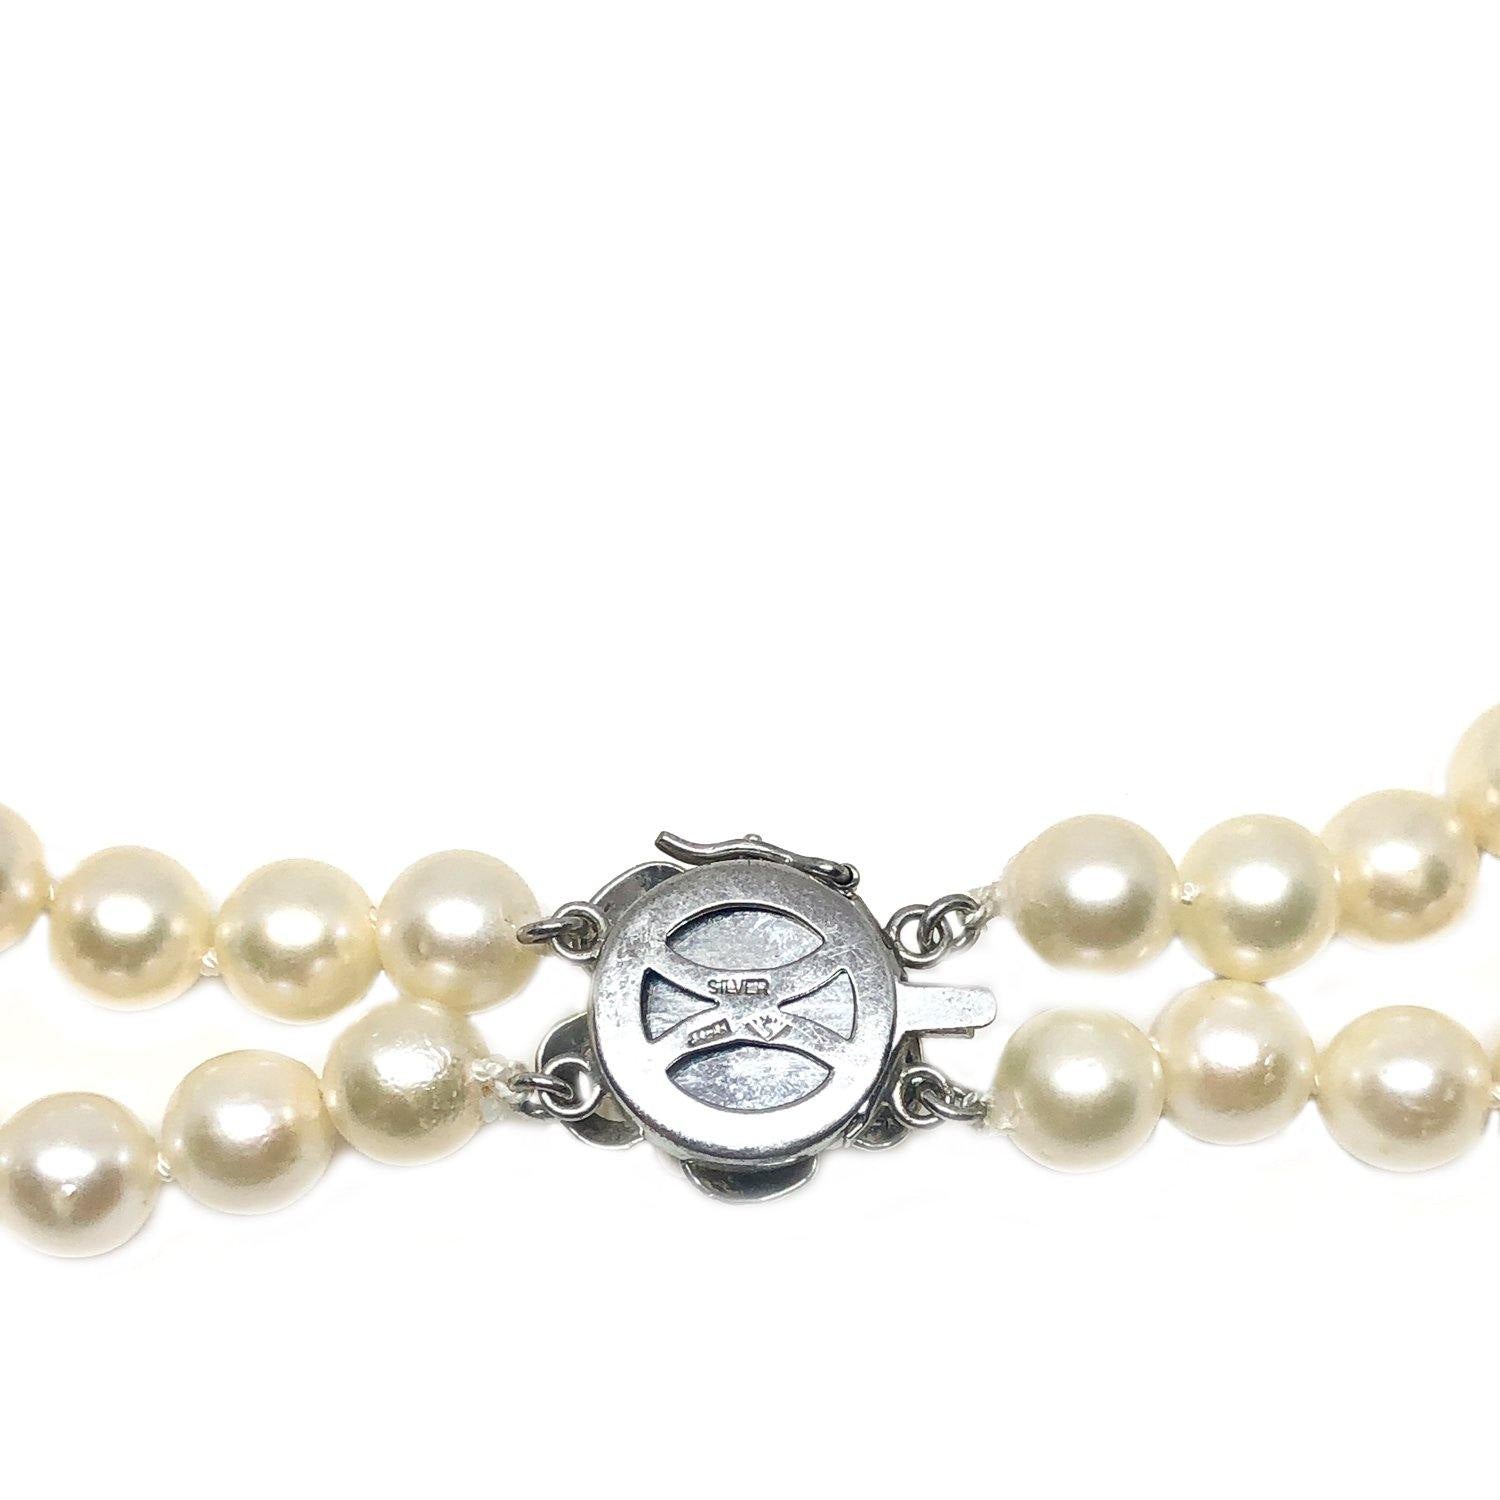 Floral Halo Japanese Saltwater Akoya Cultured Pearl Double Strand Necklace-Sterling Silver 15.50-17 Inch - Vintage Valuable Pearls